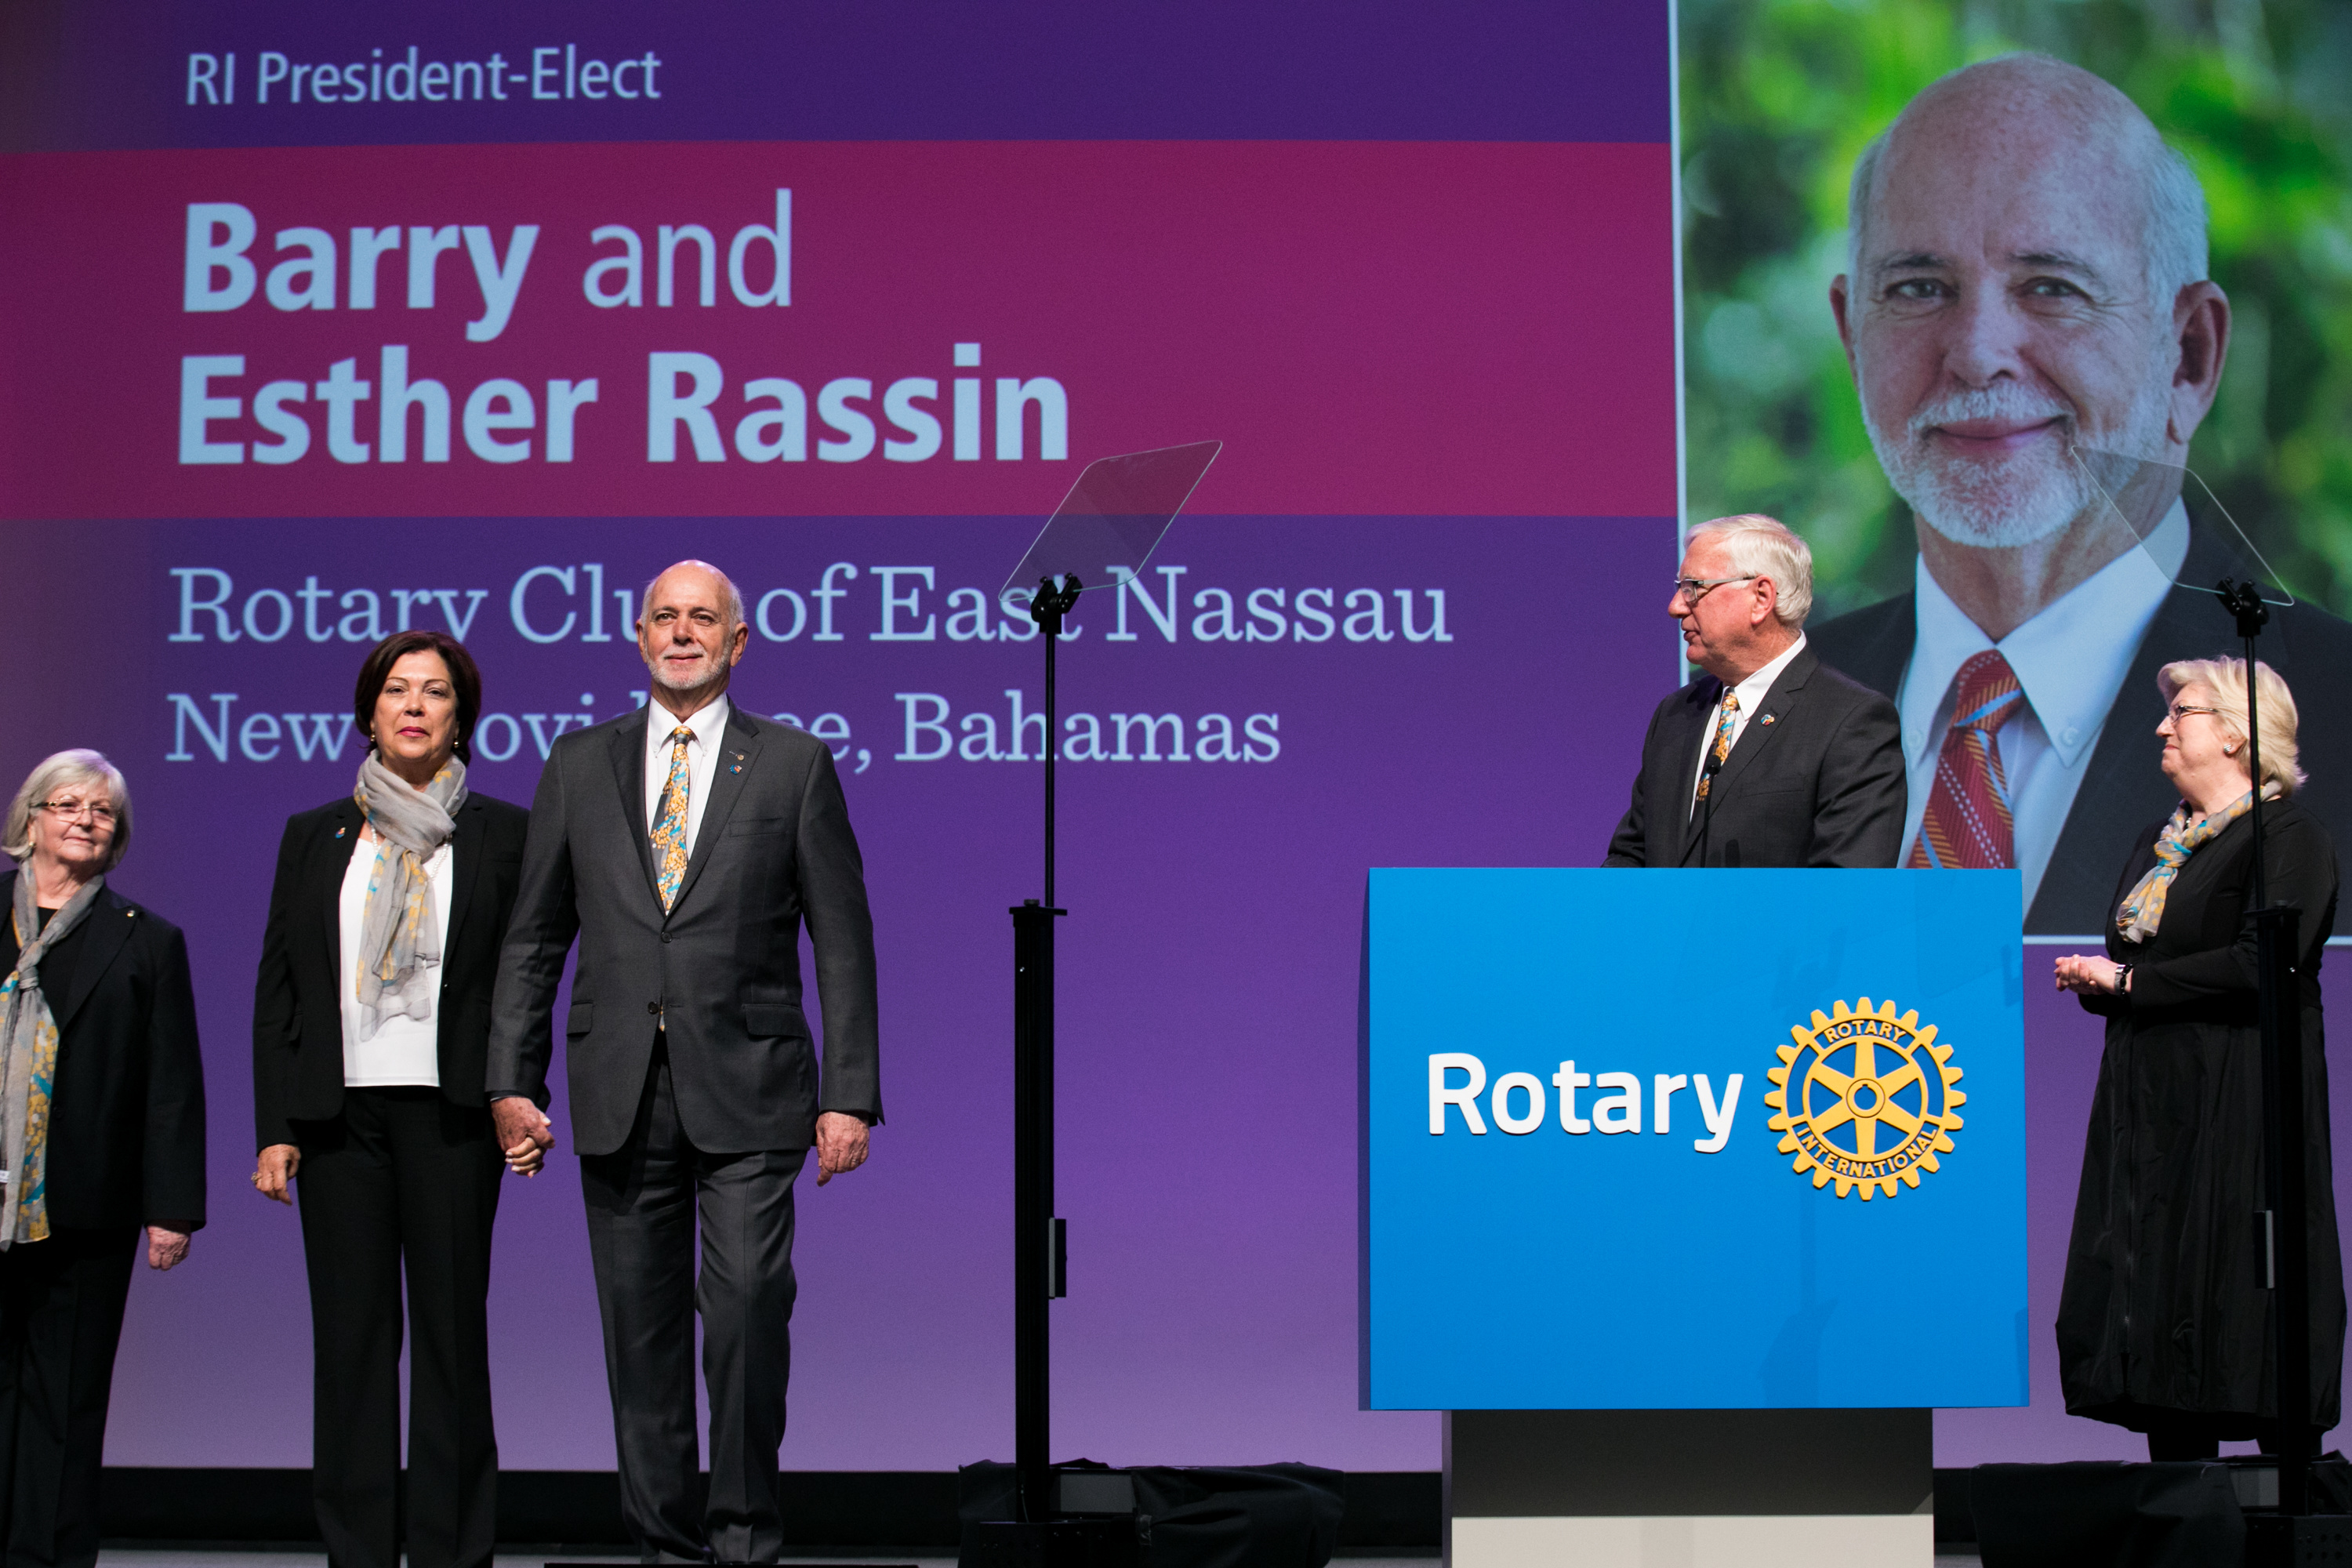 Ian H.S. Riseley, 2017-18 RI president, introduces president-elect Barry Rassin and the RI Board of Directors during general session 2 of the International Assembly, 15 January 2018, San Diego, California, USA.